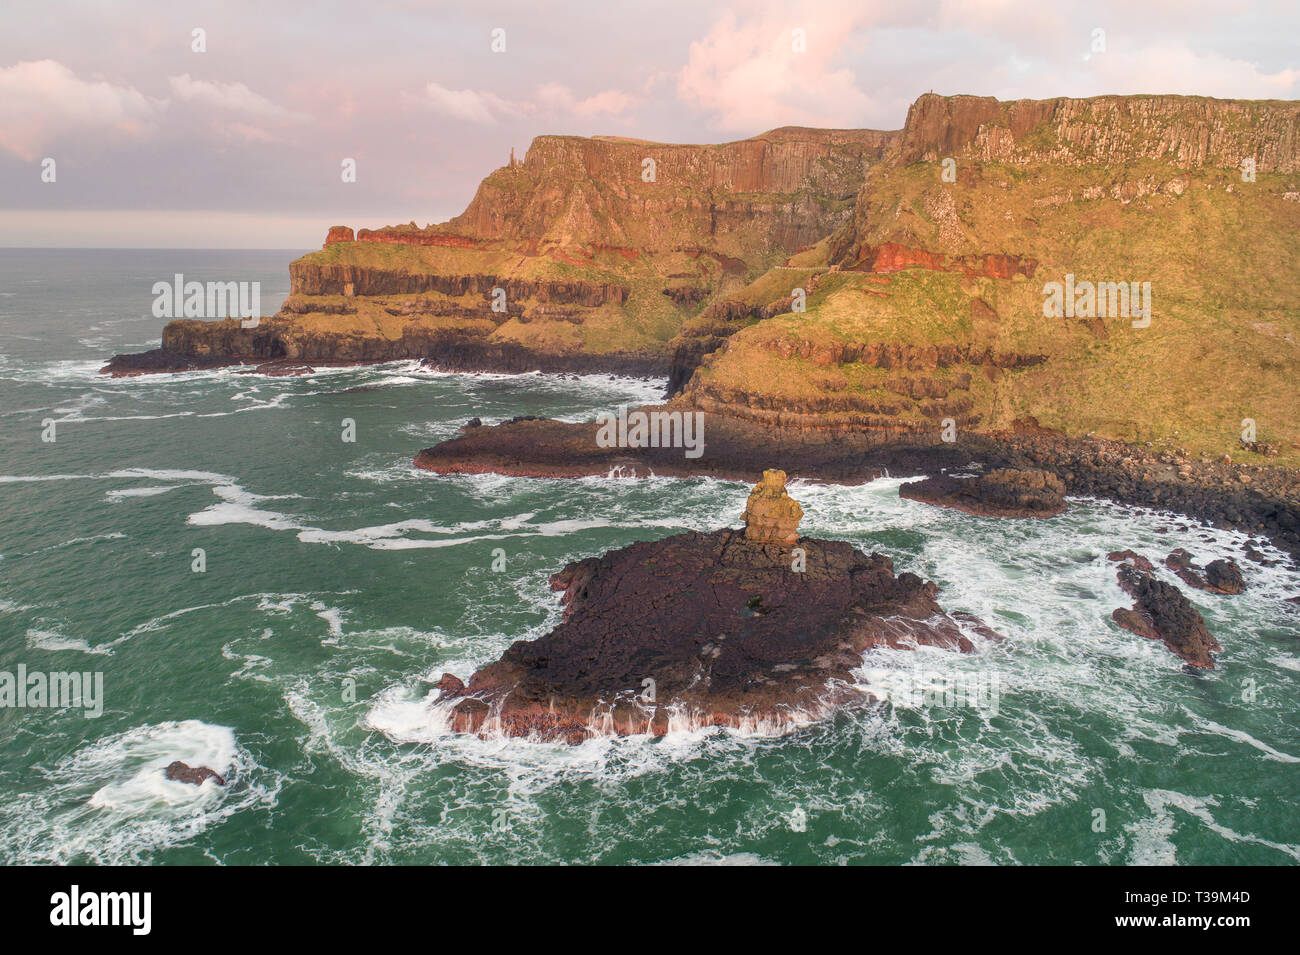 The beautiful rugged coastline of the Giants Causeway in County Antrim, Northern Ireland. Stock Photo